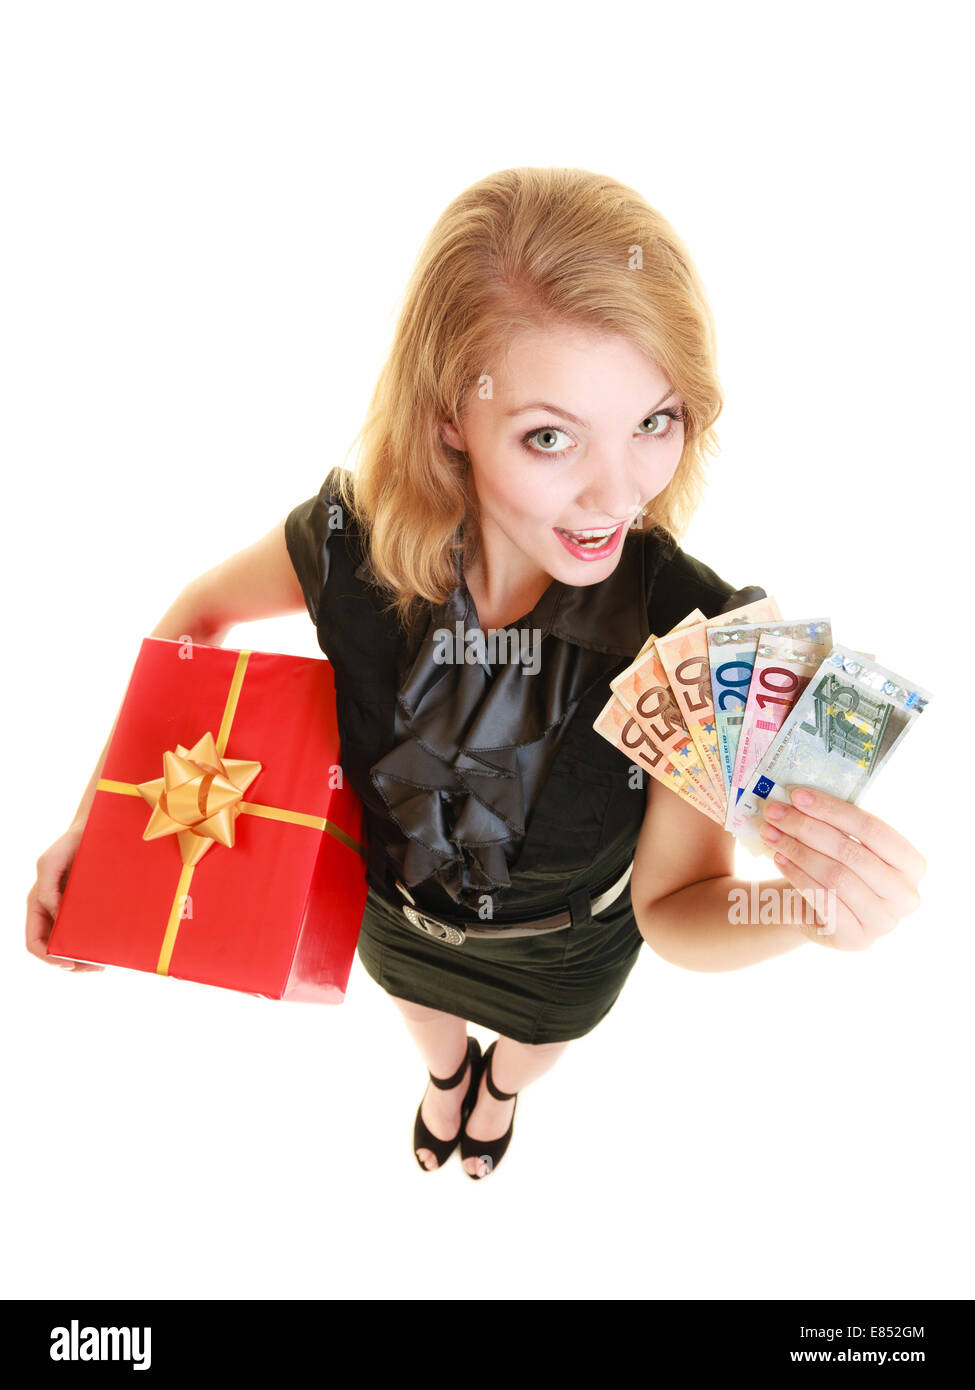 Happy smiling blonde girl young woman holding red christmas gift box and euro currency money banknotes. Holidays time for gifts. Stock Photo